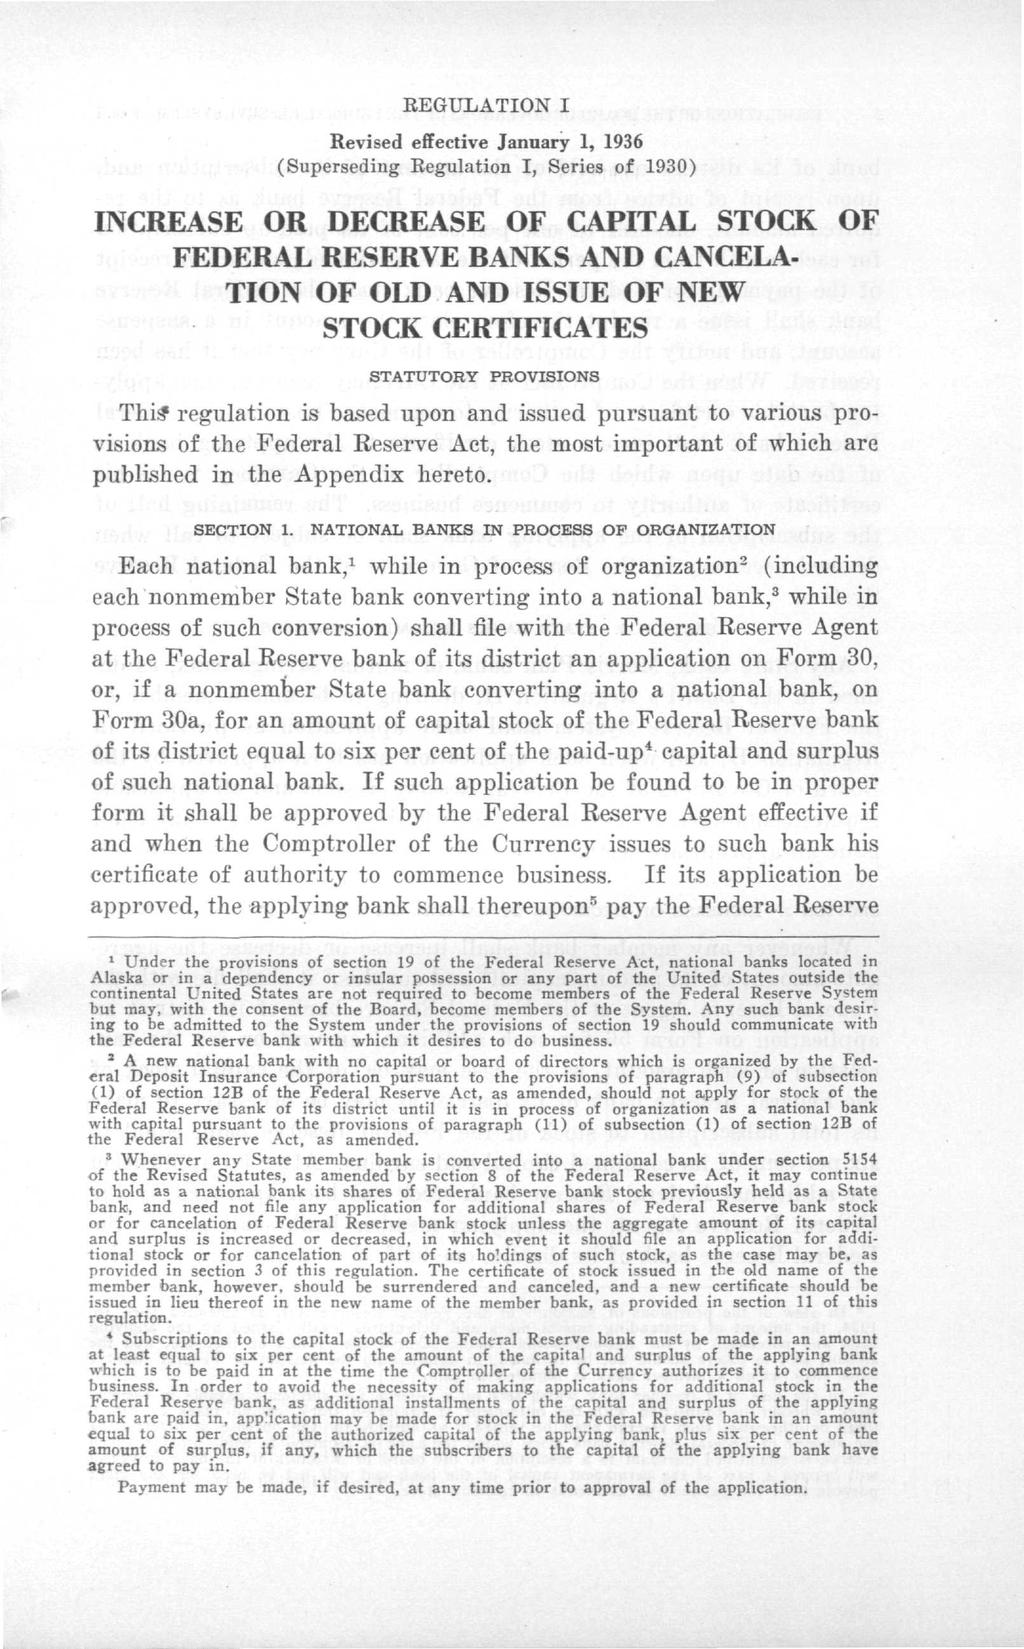 EEGUliATION I Revised effective January 1, 1936 (Superseding Eegulation I, Series of 1930) INCREASE OR DECREASE OF CAPITAL STOCK OF FEDERAL RESERVE BANKS AND CANCELA- TION OF OLD AND ISSUE OF NEW